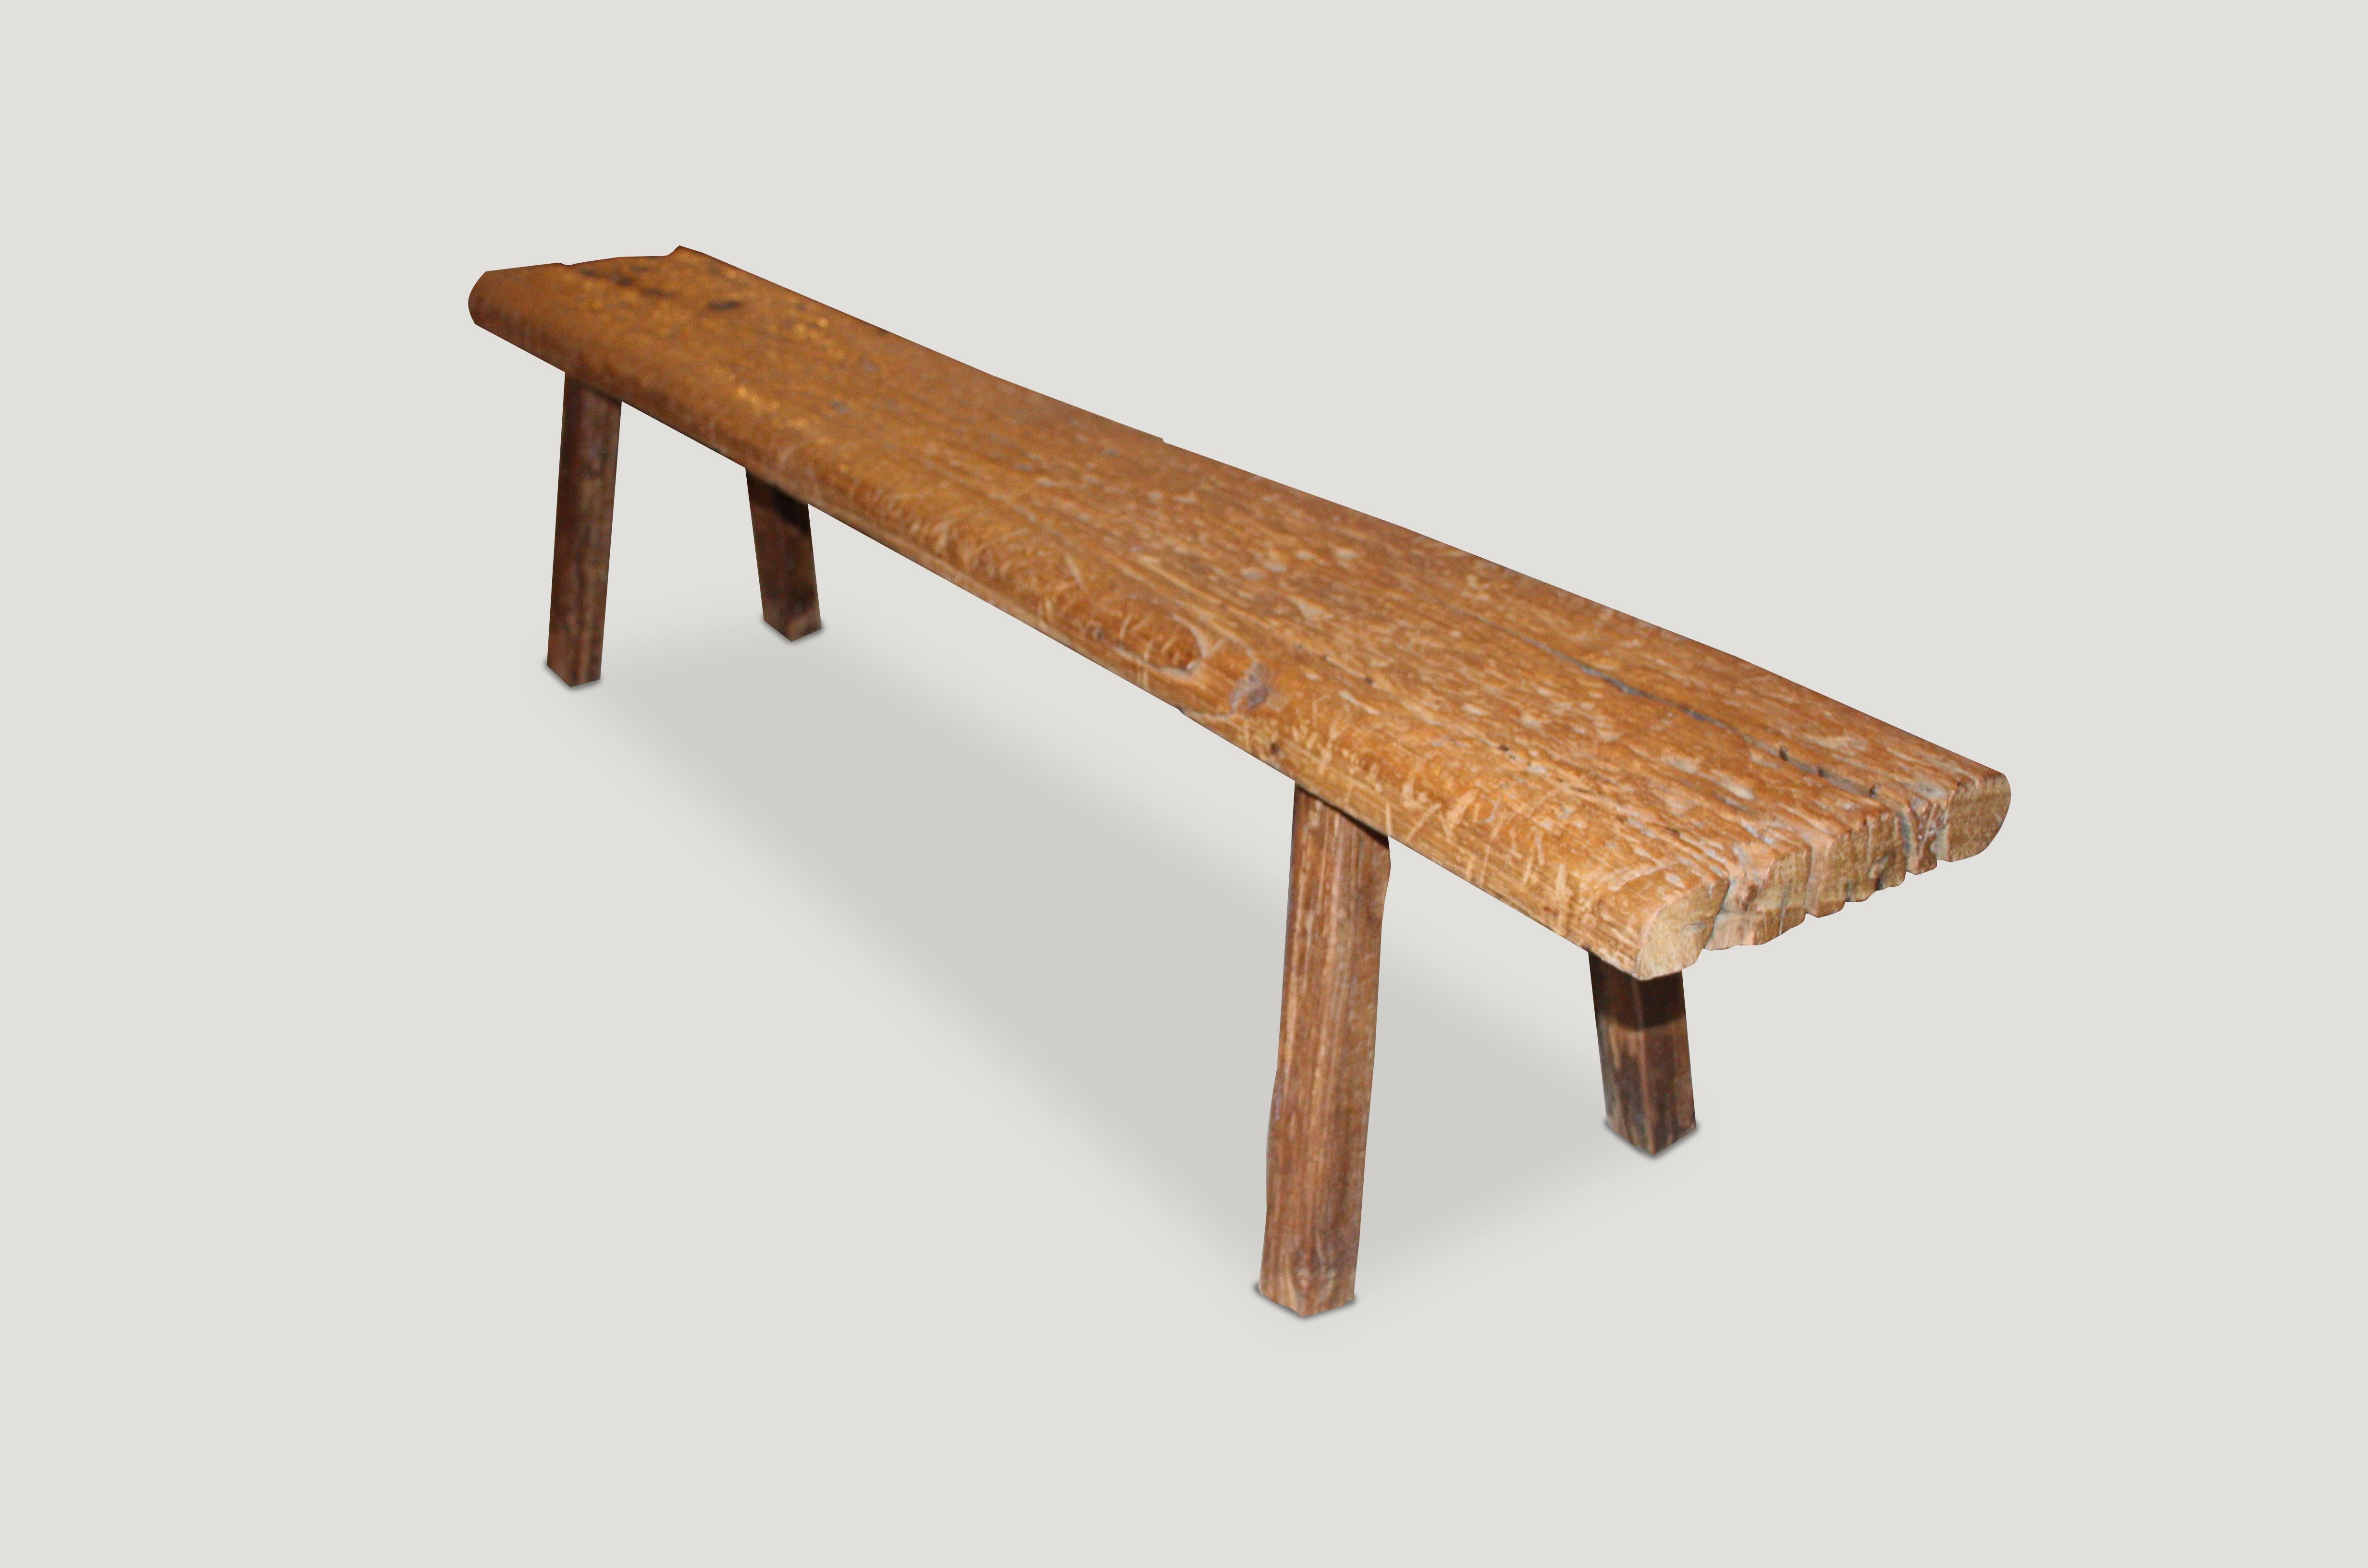 Antique hand carved Wabi Sabi bench with original natural marking. Perfect for inside or outside living.

This bench was sourced in the spirit of wabi-sabi, a Japanese philosophy that beauty can be found in imperfection and impermanence. It’s a